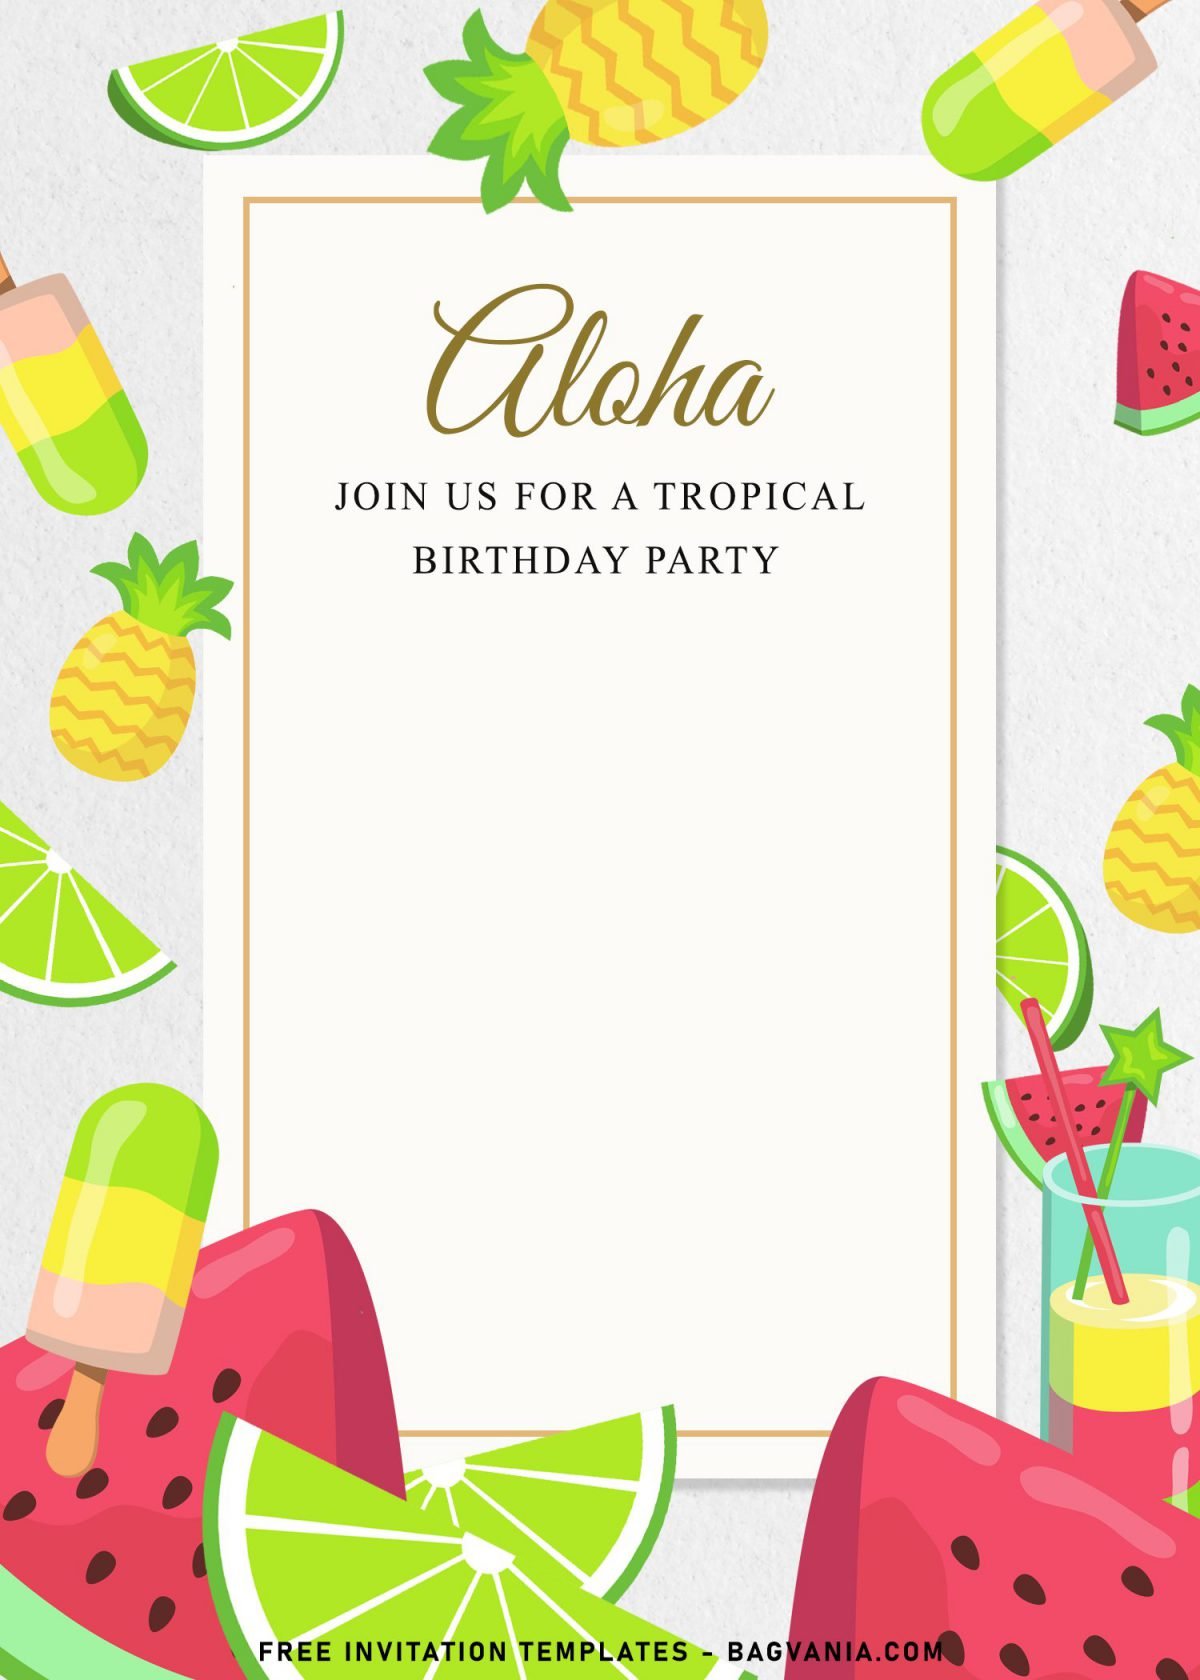 7+ Best Tropical Birthday Invitation Templates To Celebrate Your Kid's Birthday In Summer and has white text box